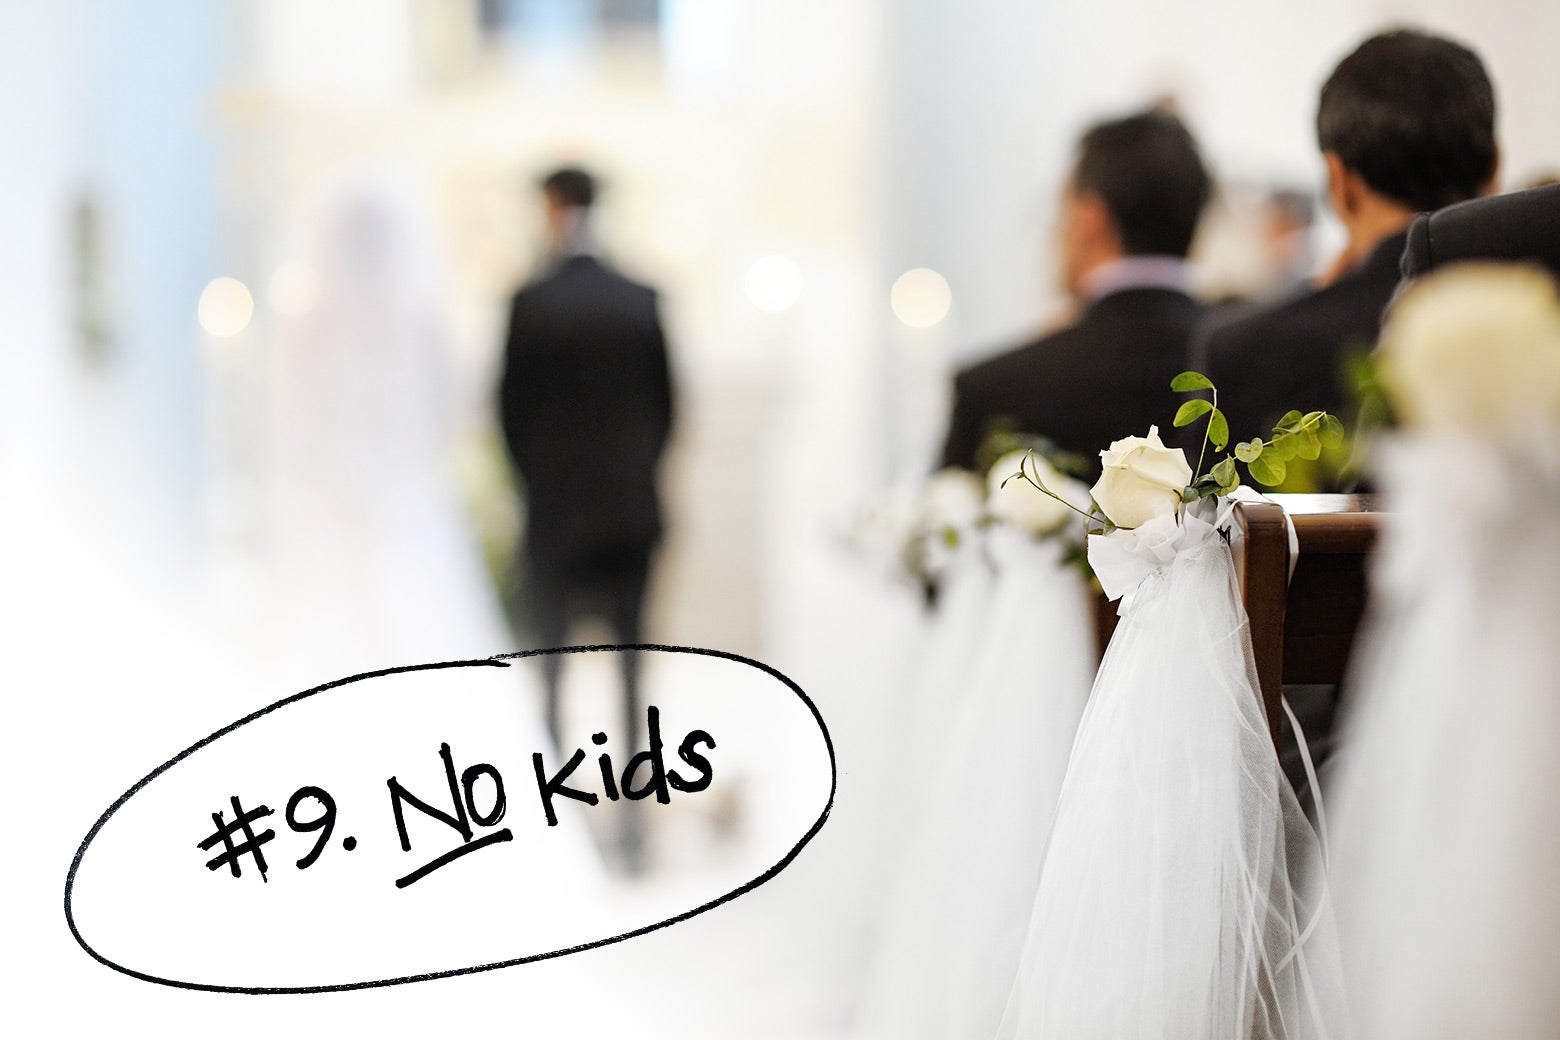 Wedding etiquette: 26 new rules you now must follow in 2023. - Slate